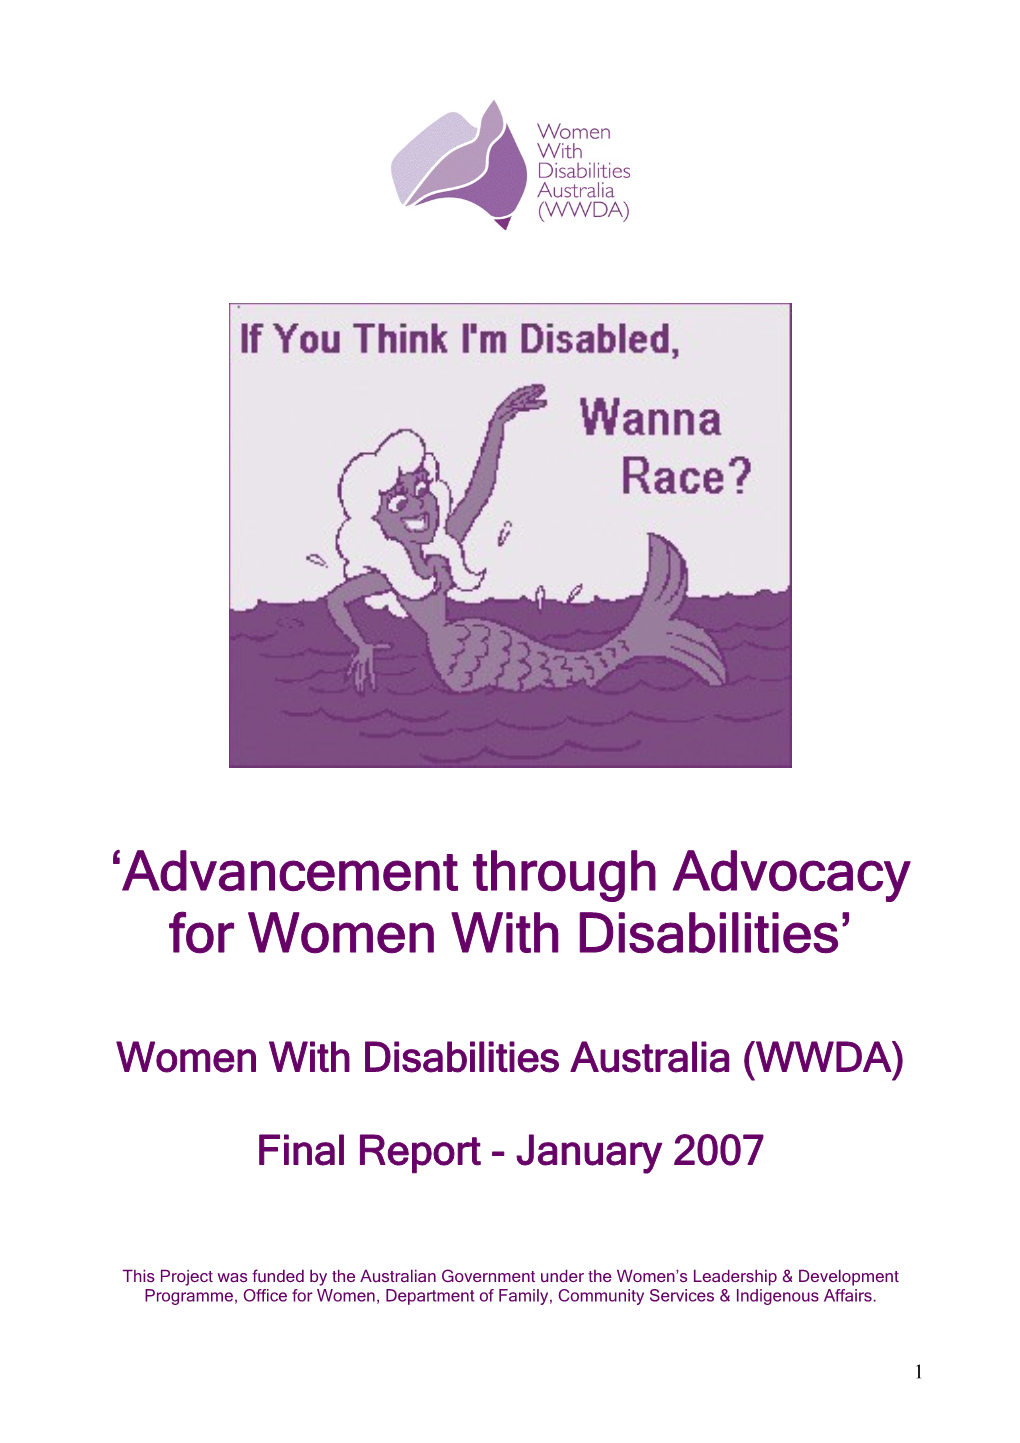 Advancement Through Advocacy for Women with Disabilities